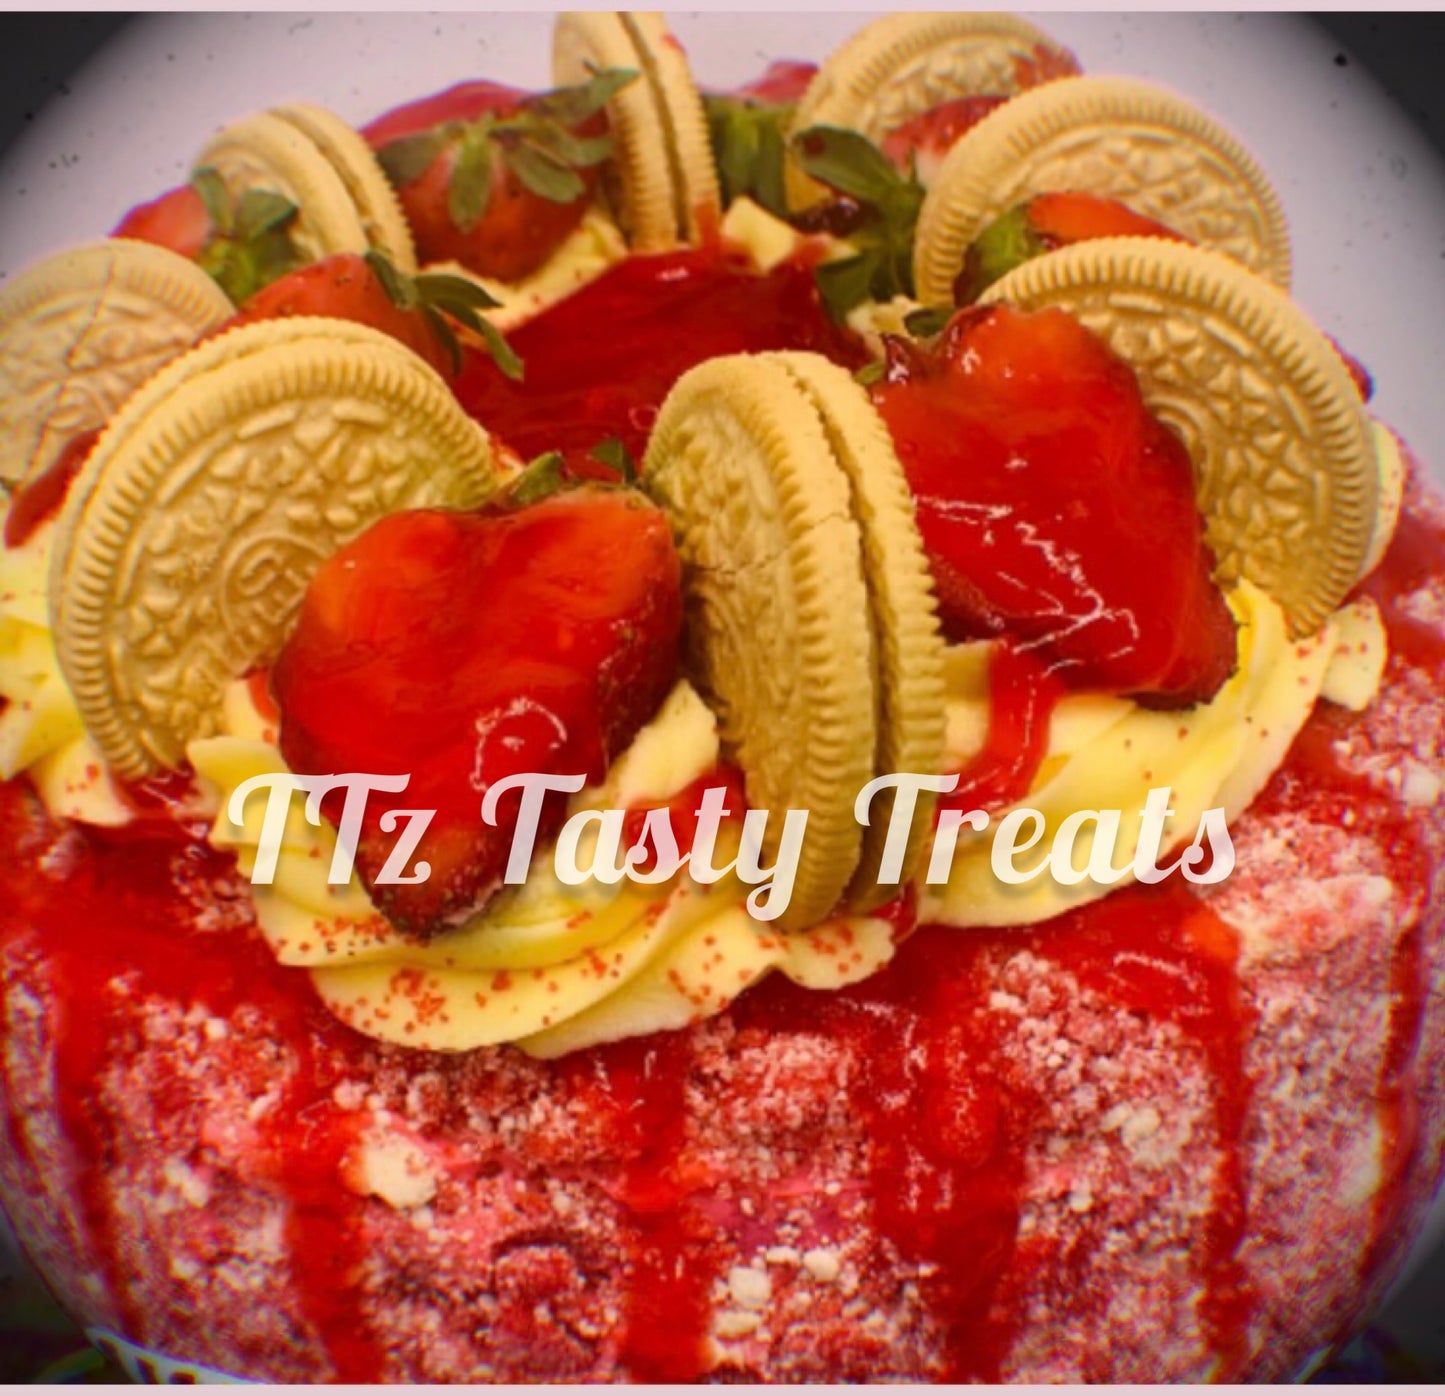 Strawberry crunch cake (pick up only )